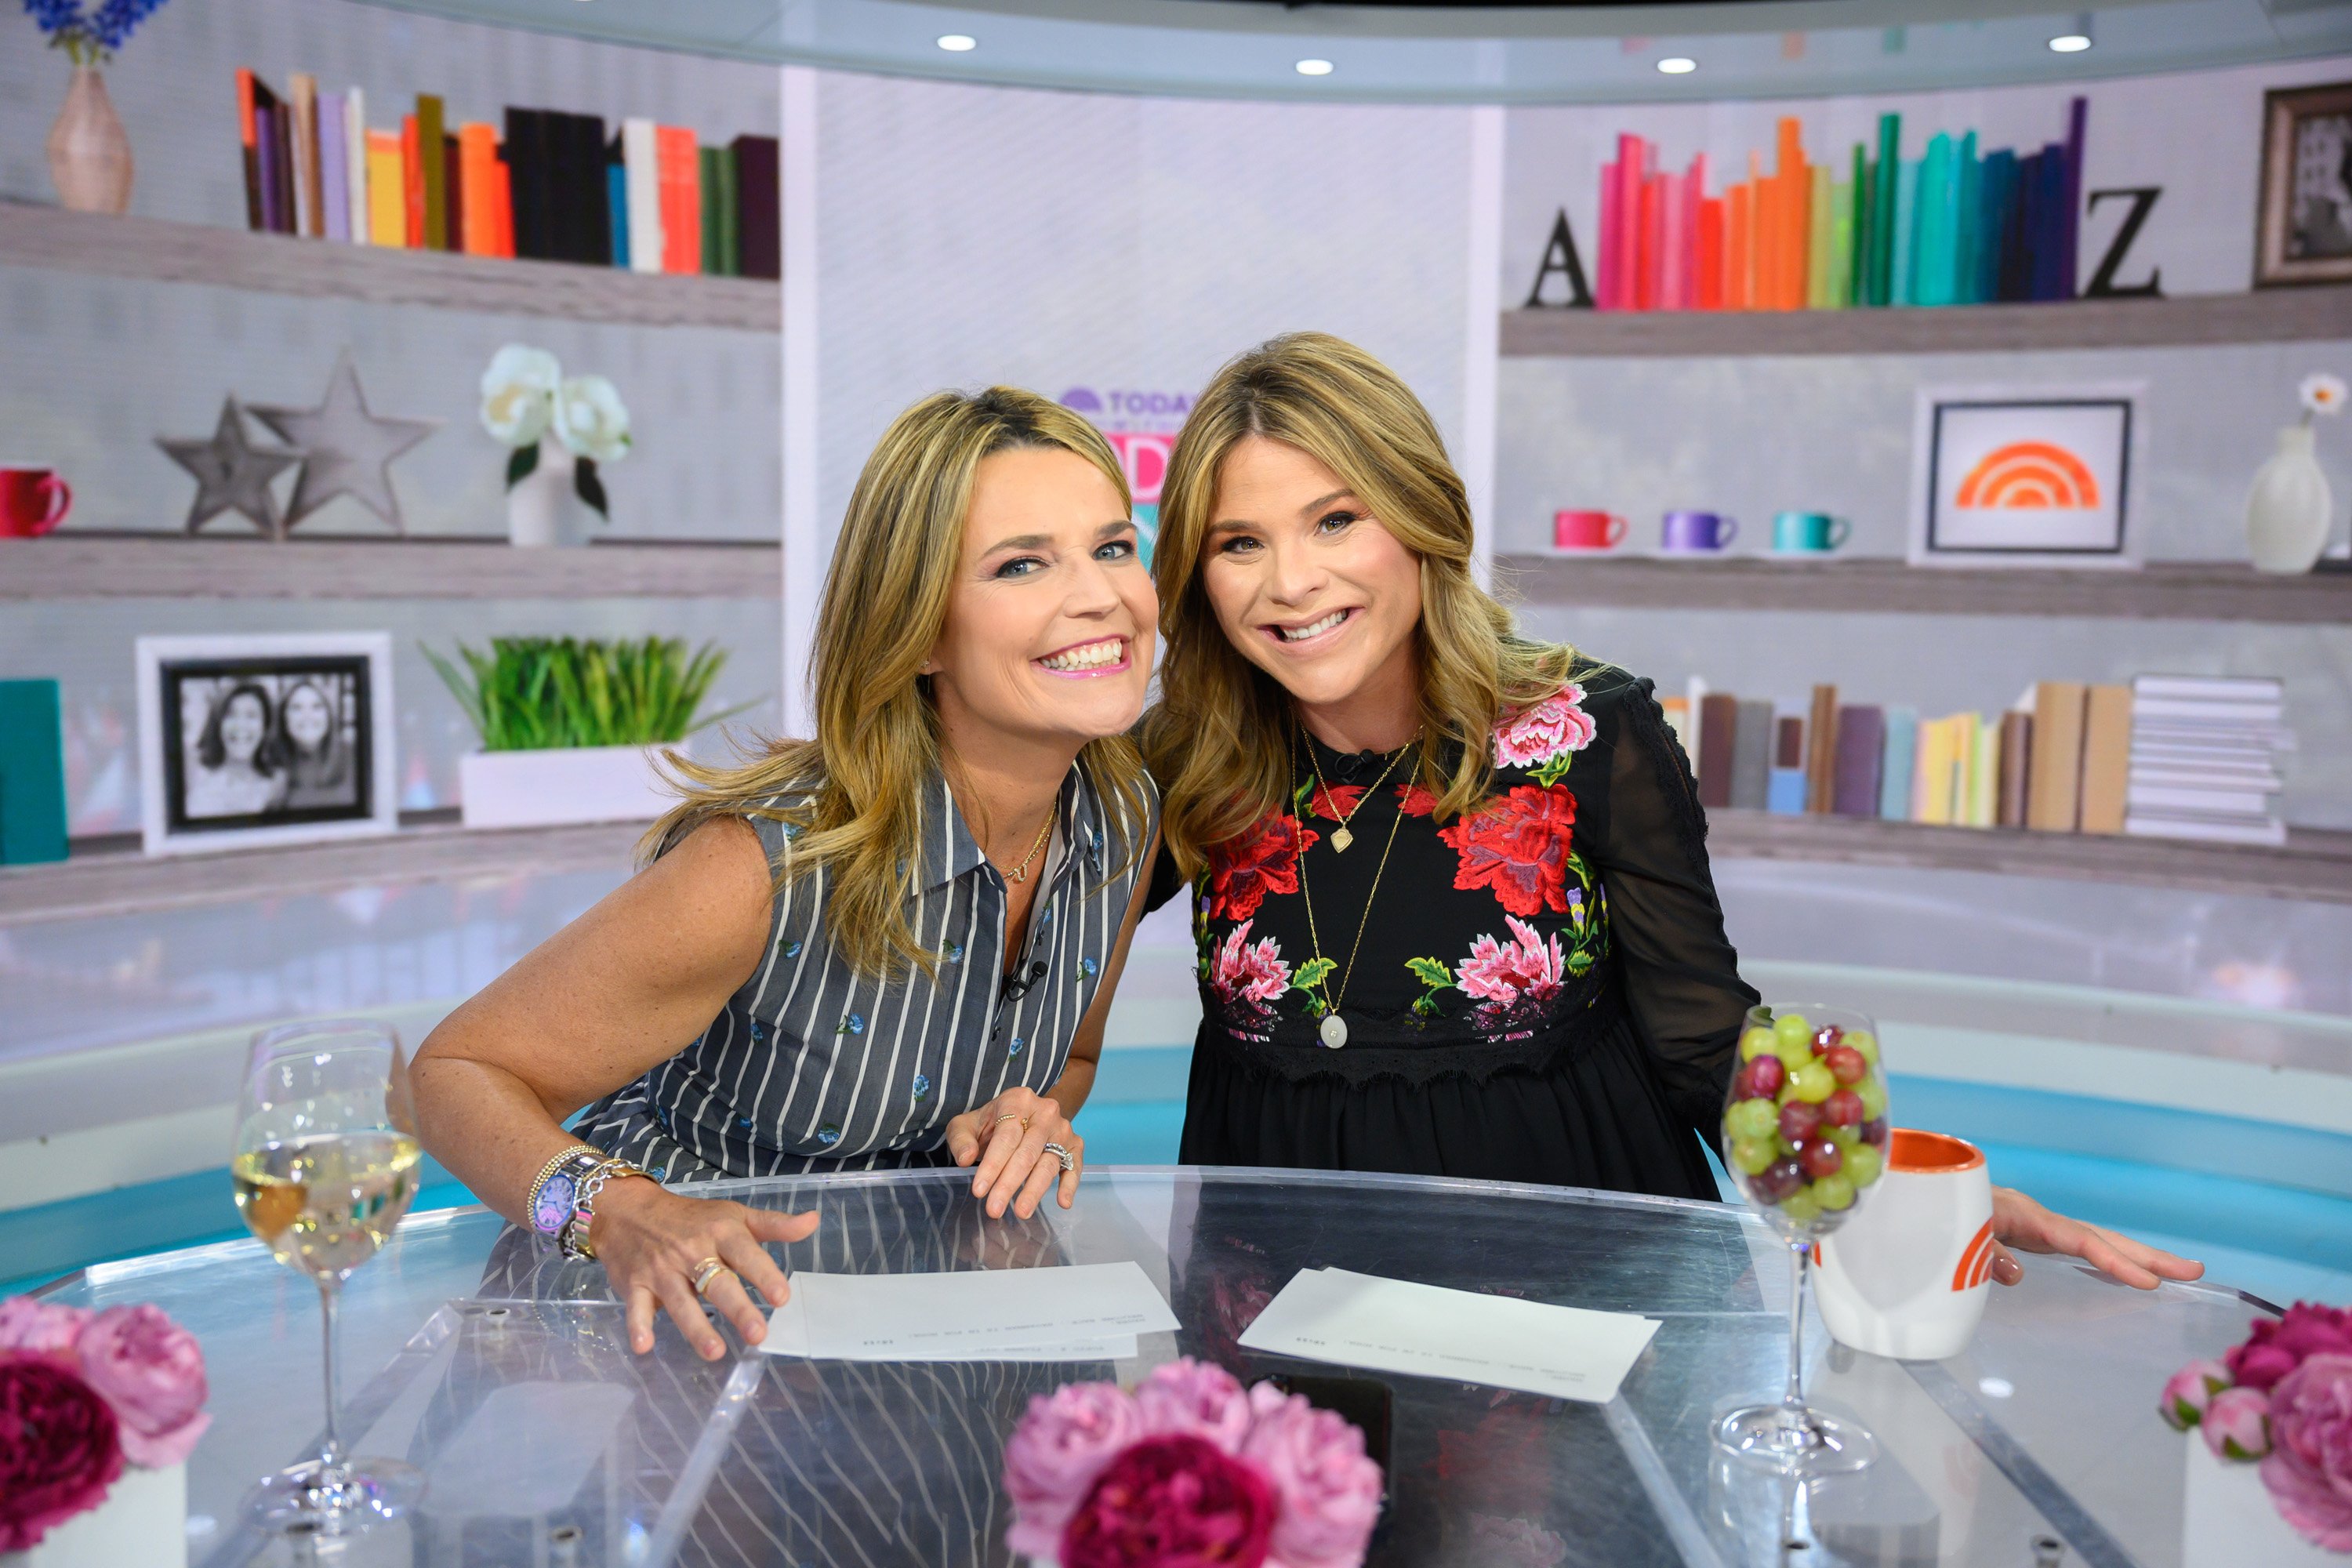 Savannah Guthrie and Jenna Bush Hager in the "Today Show" studio on July 15, 2019 | Photo: Getty Images